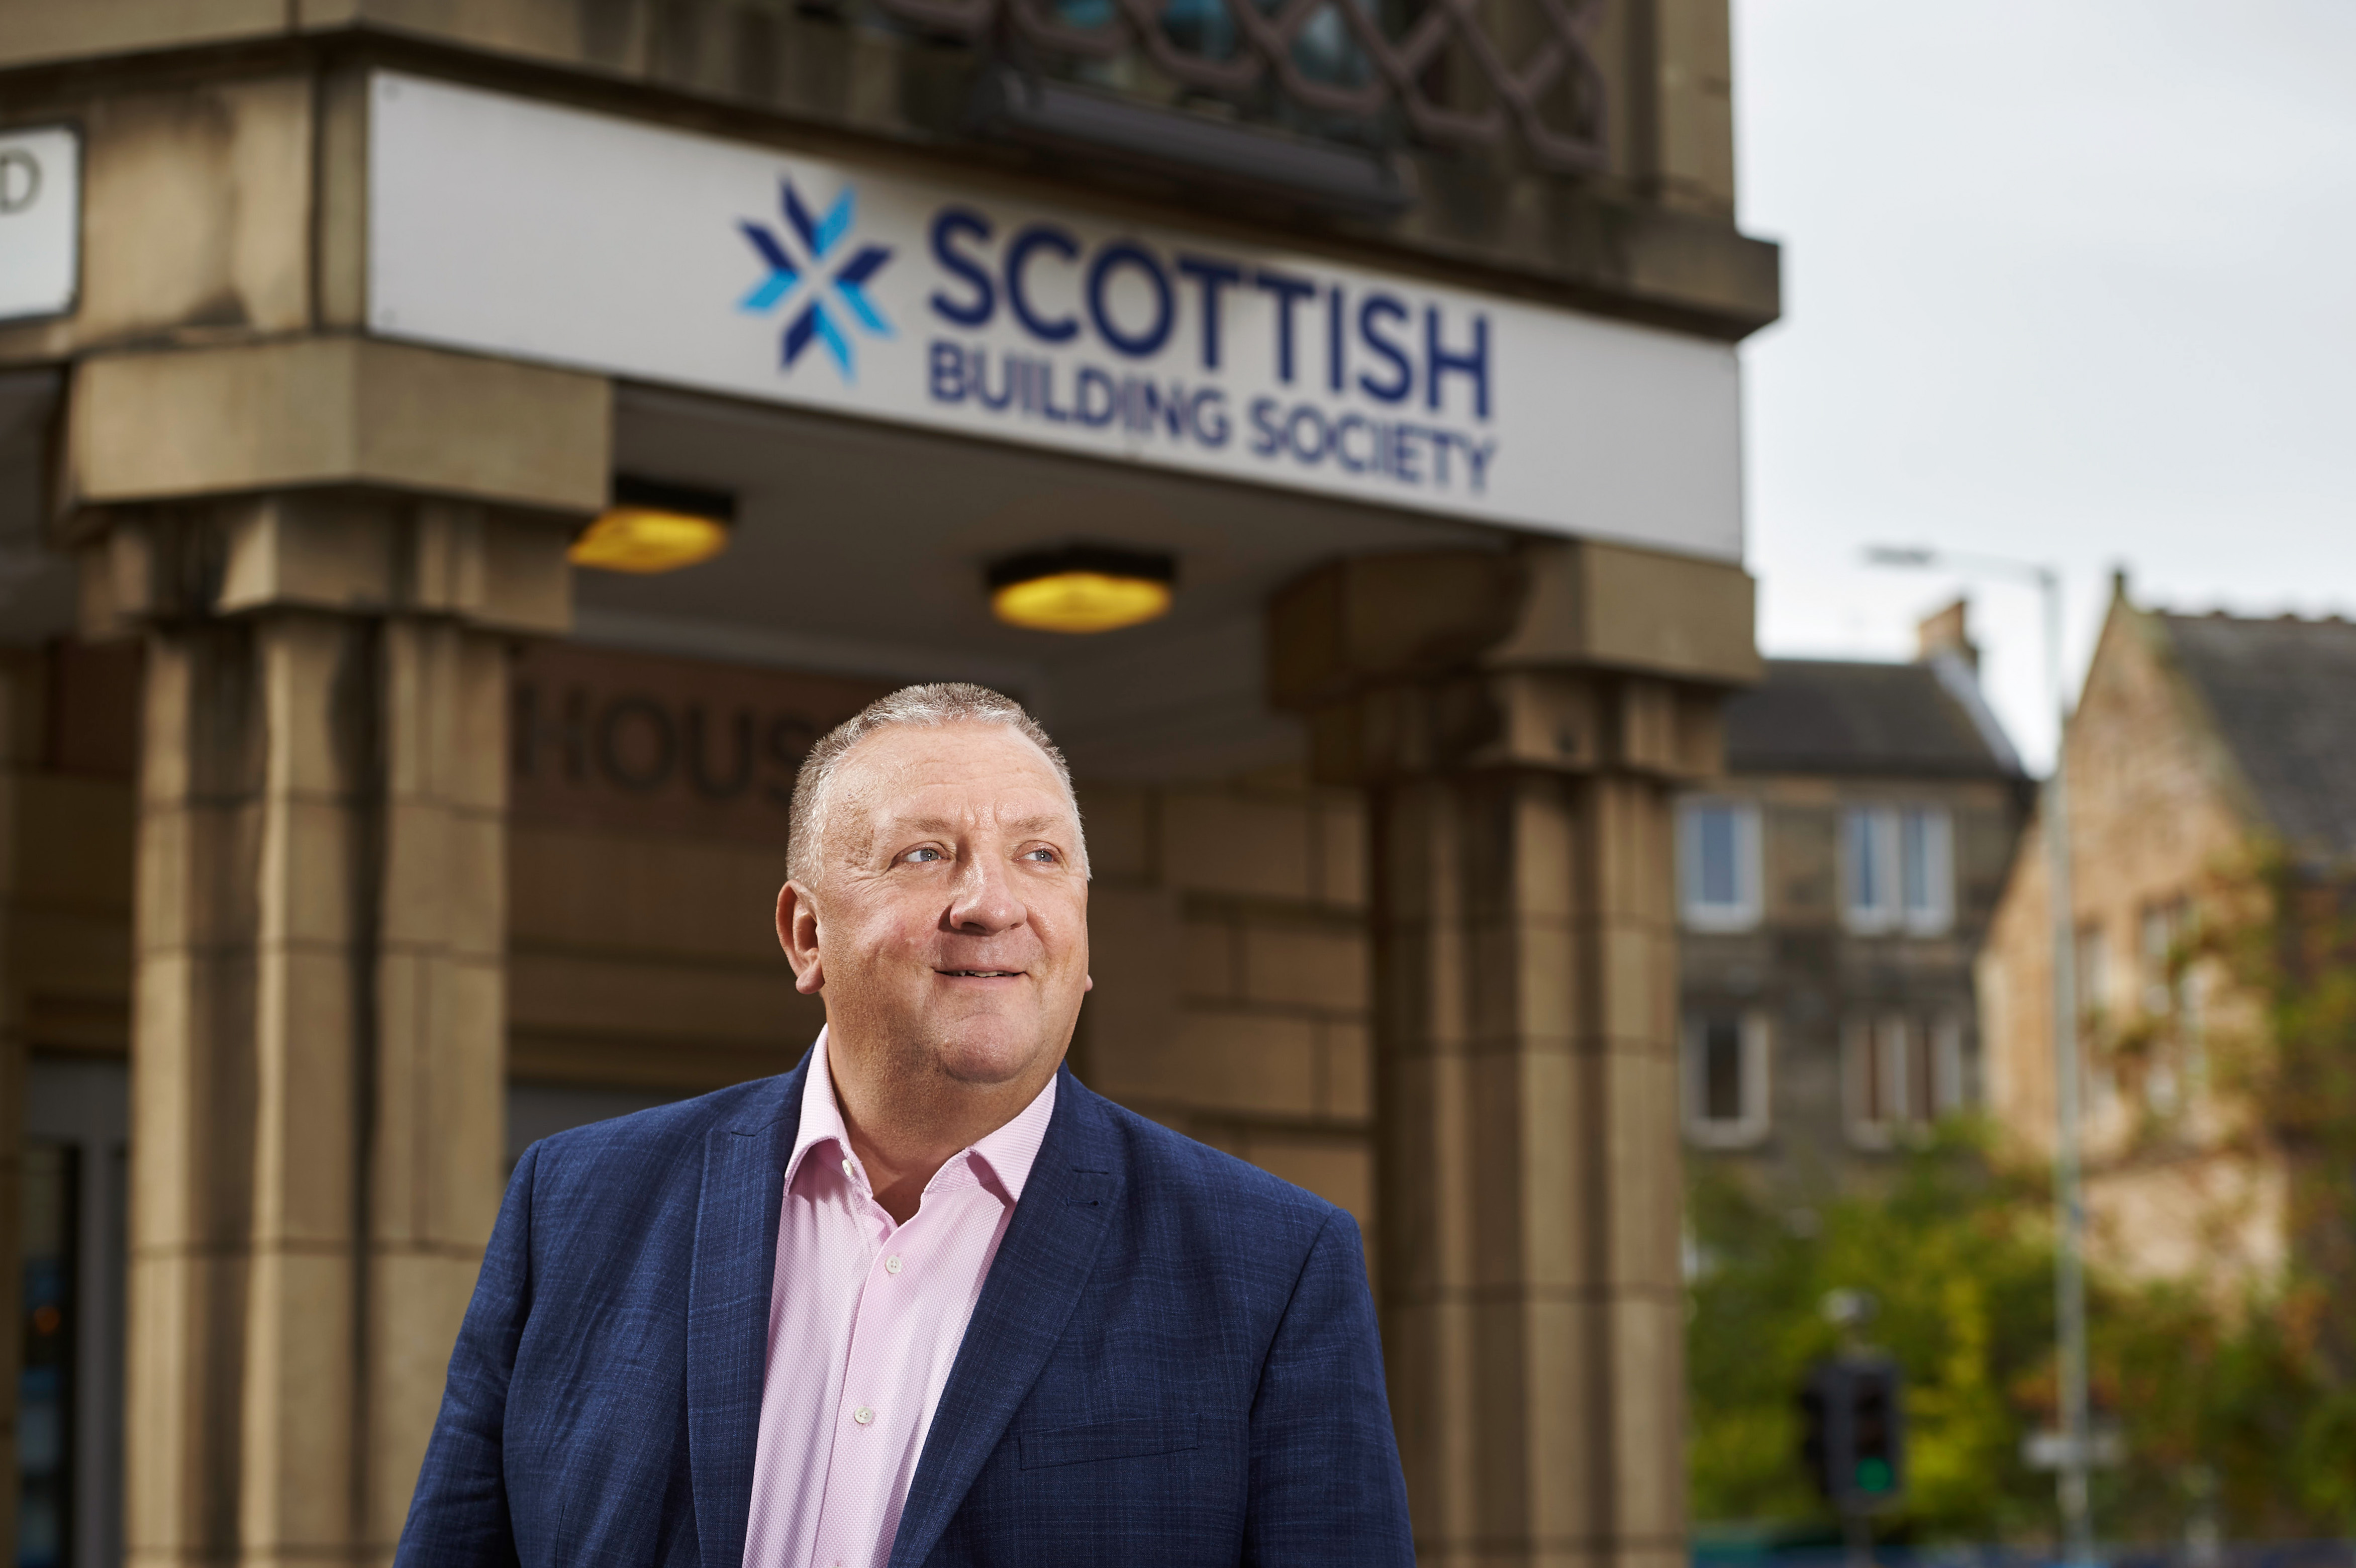 Scottish Building Society sees record increases in mortgage lending and savings